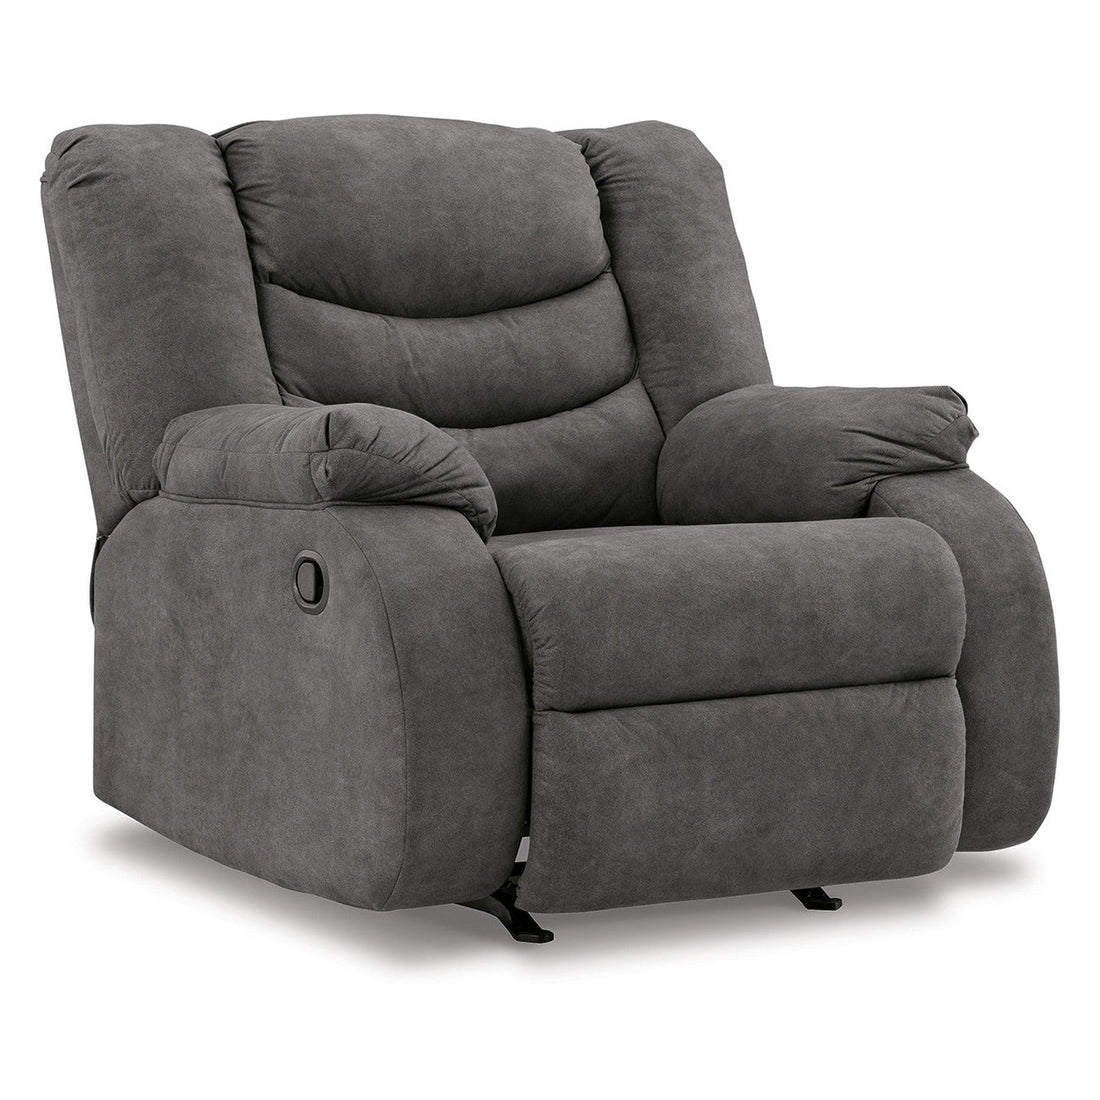 Partymate Recliner Ash-3690325